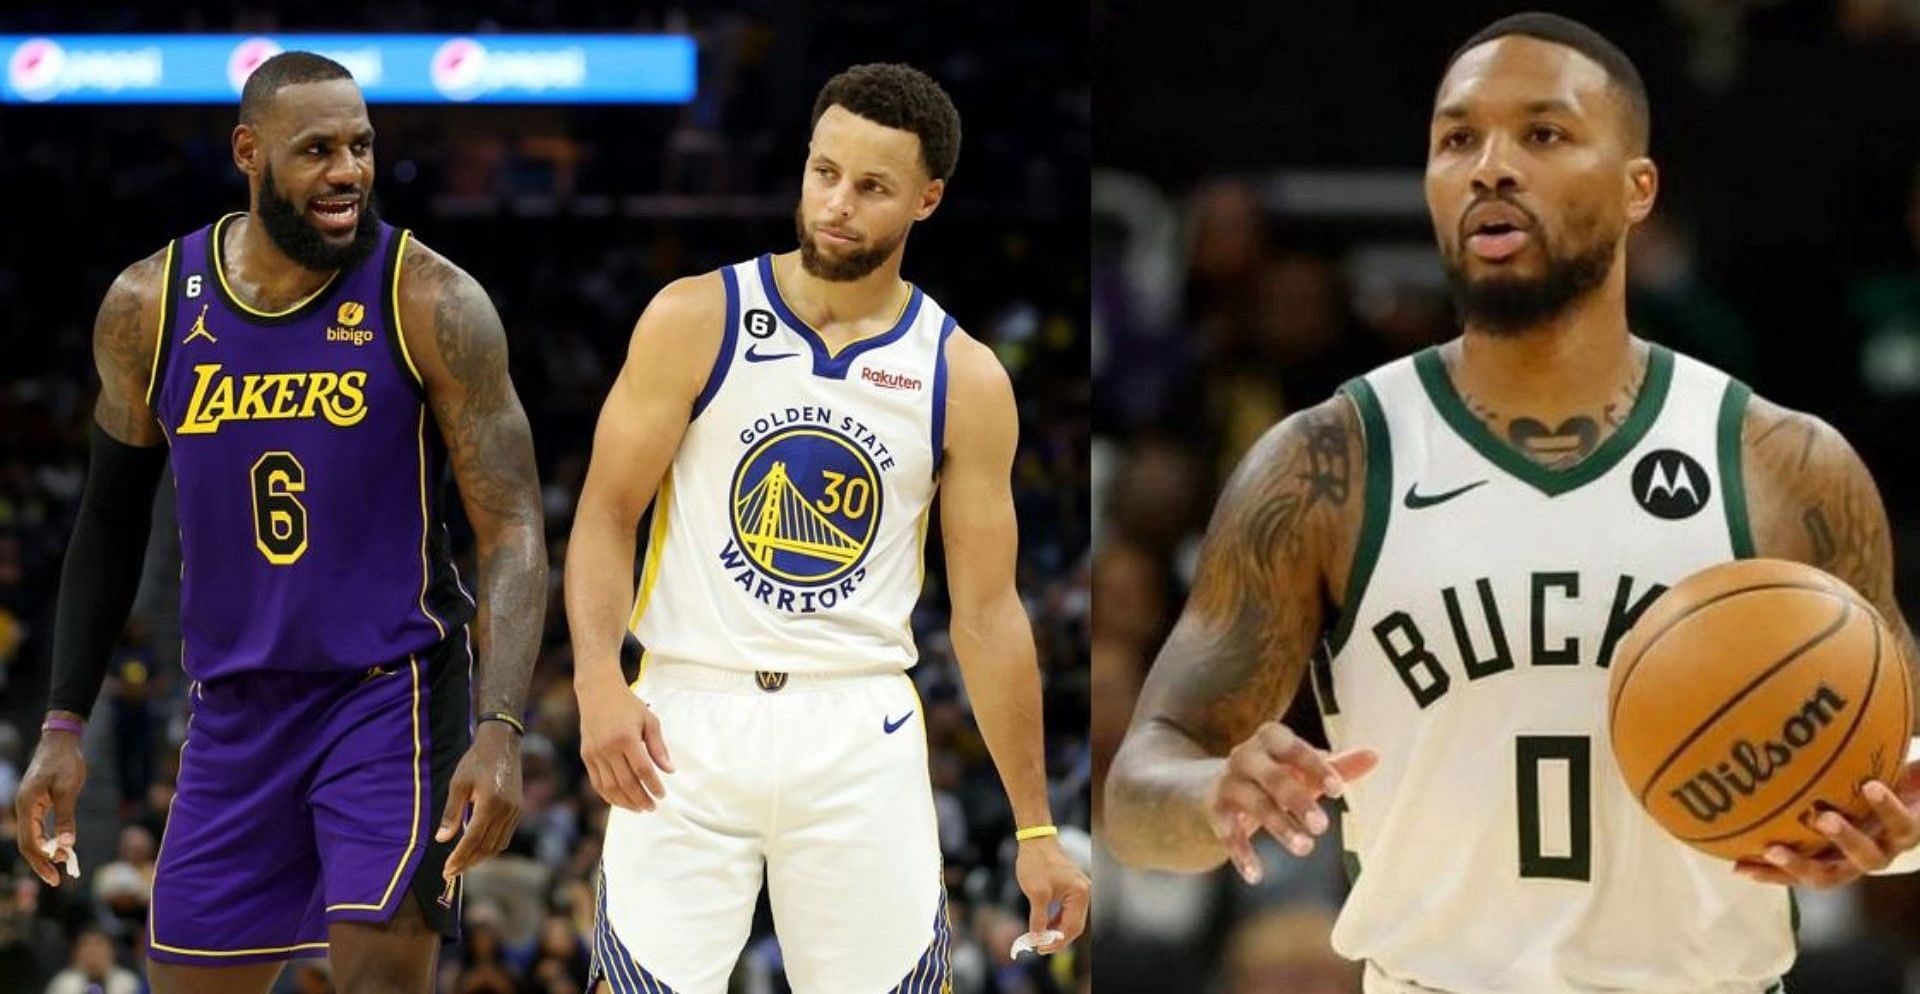 (From left) LeBron James, Stephen Curry and Damian Lillard are among active NBA players with 20,000 career points or more.